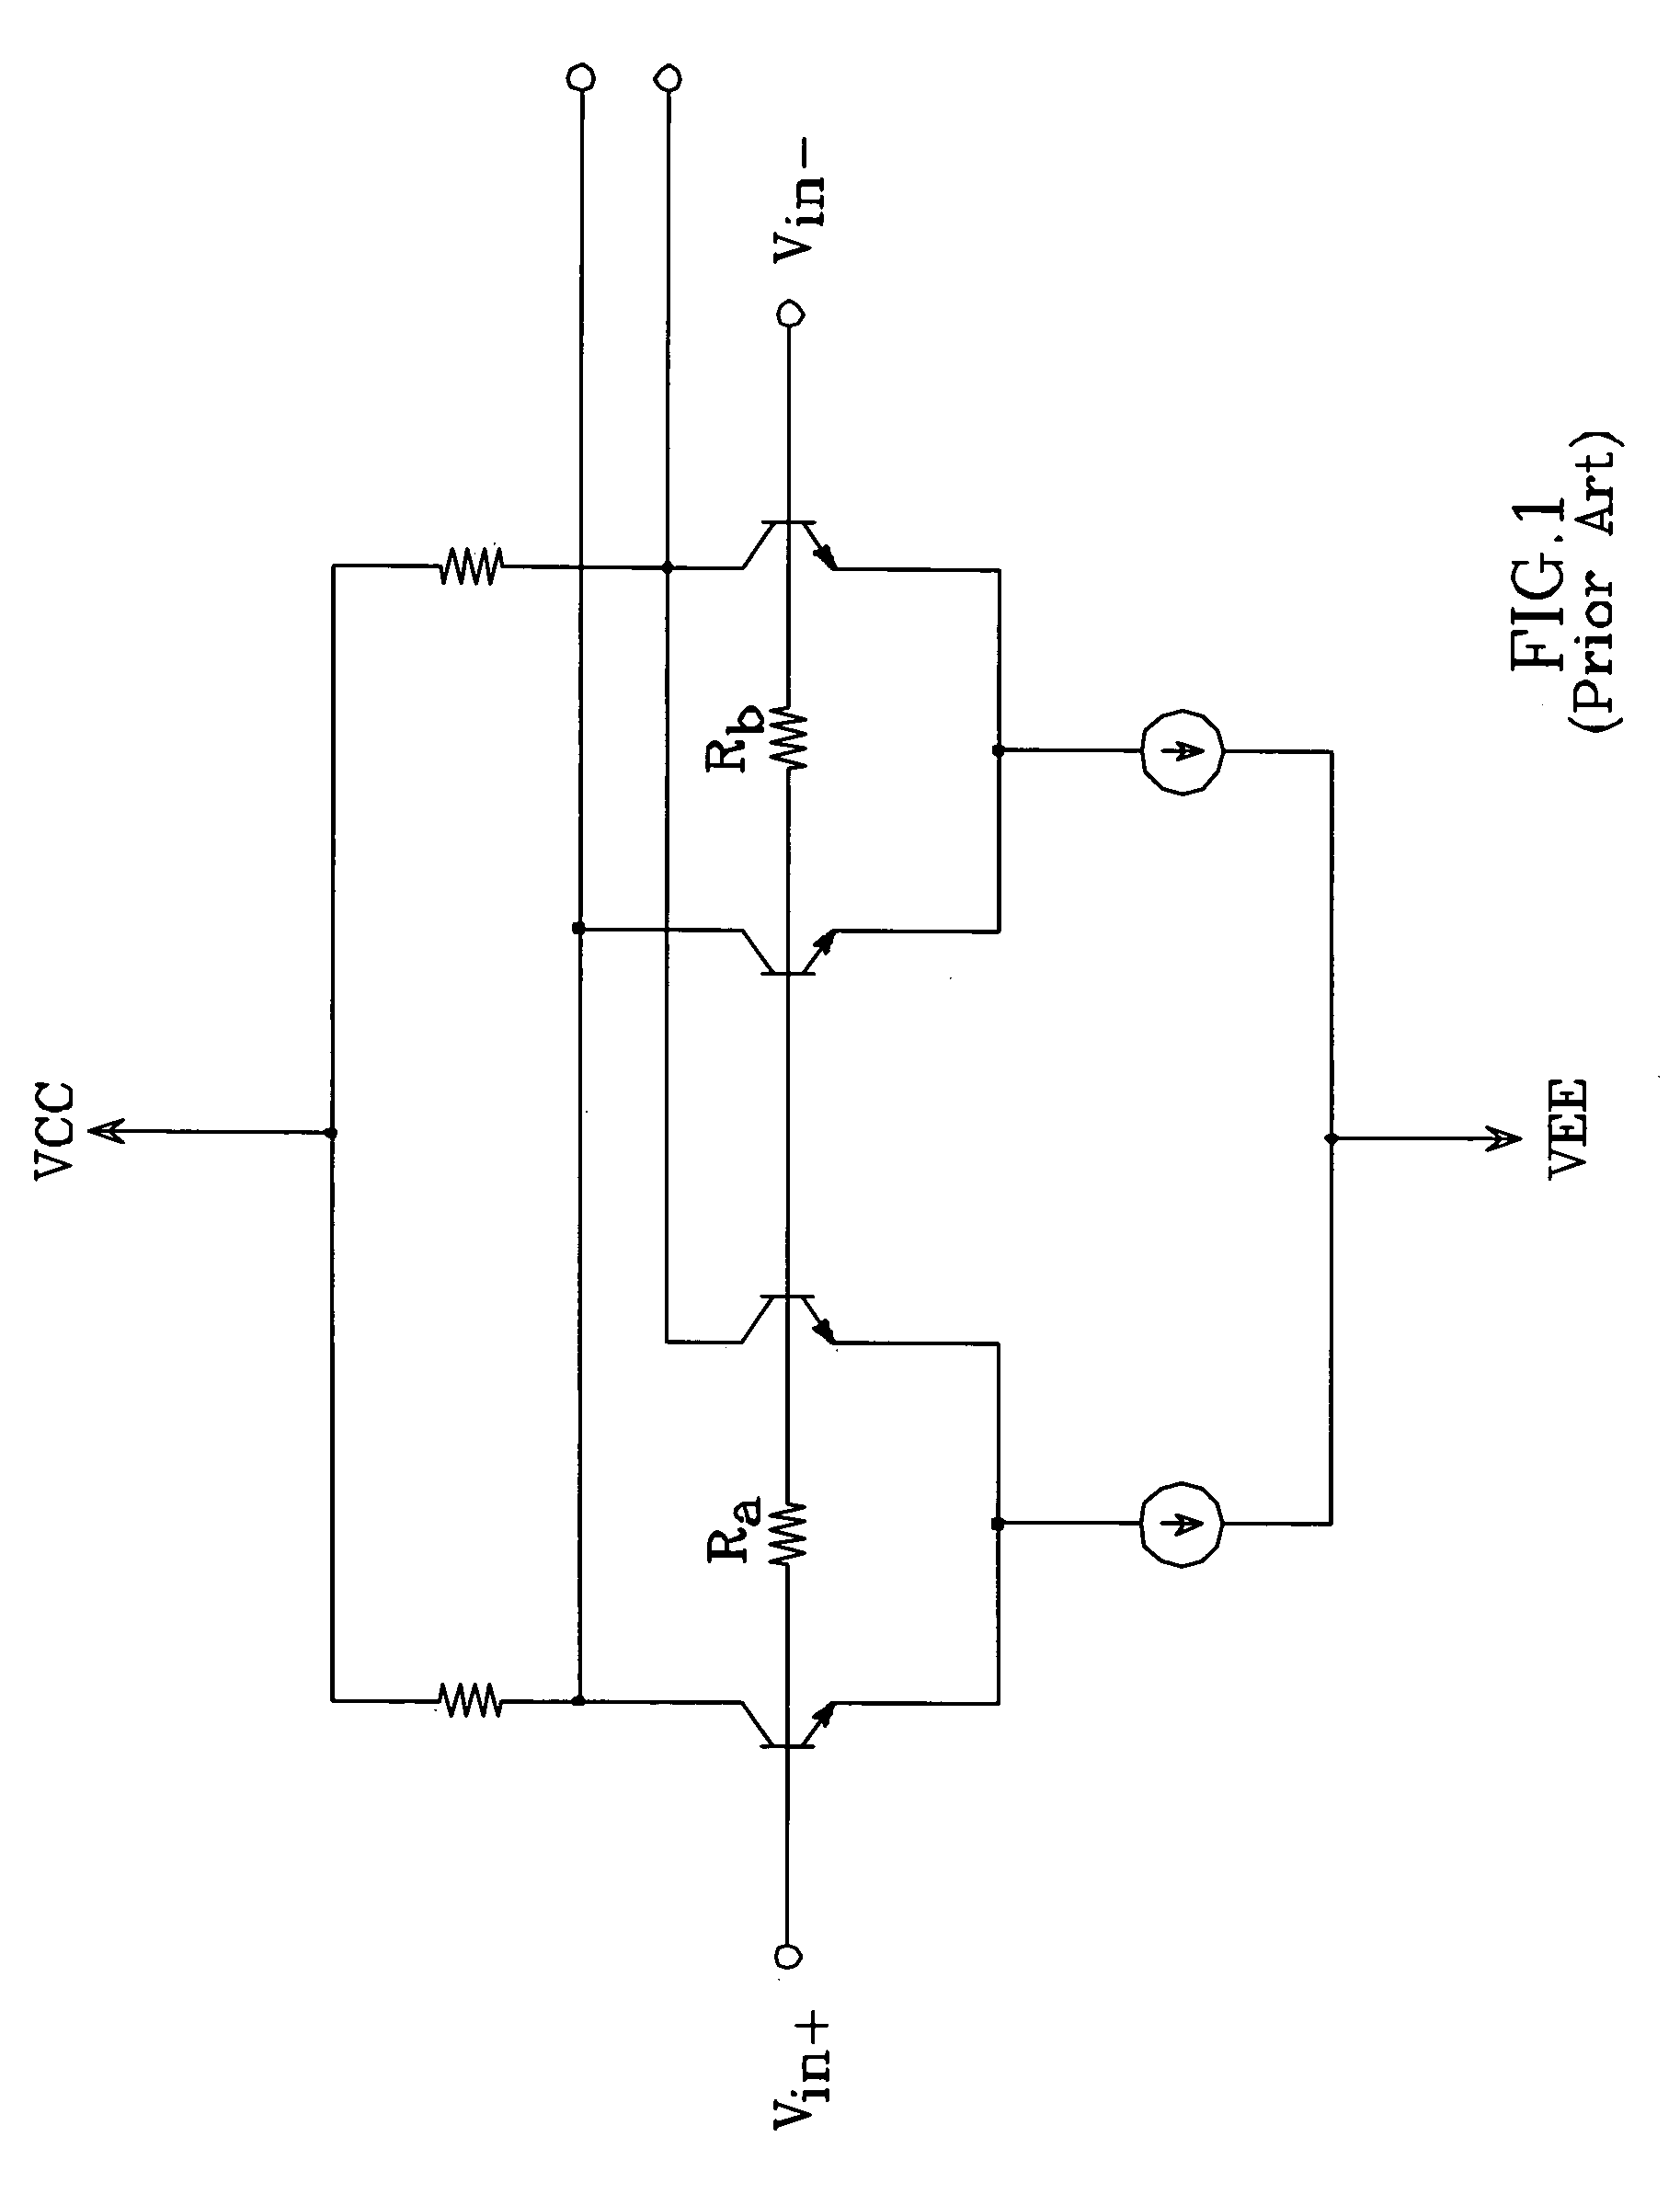 Common mode linearized input stage and amplifier topology